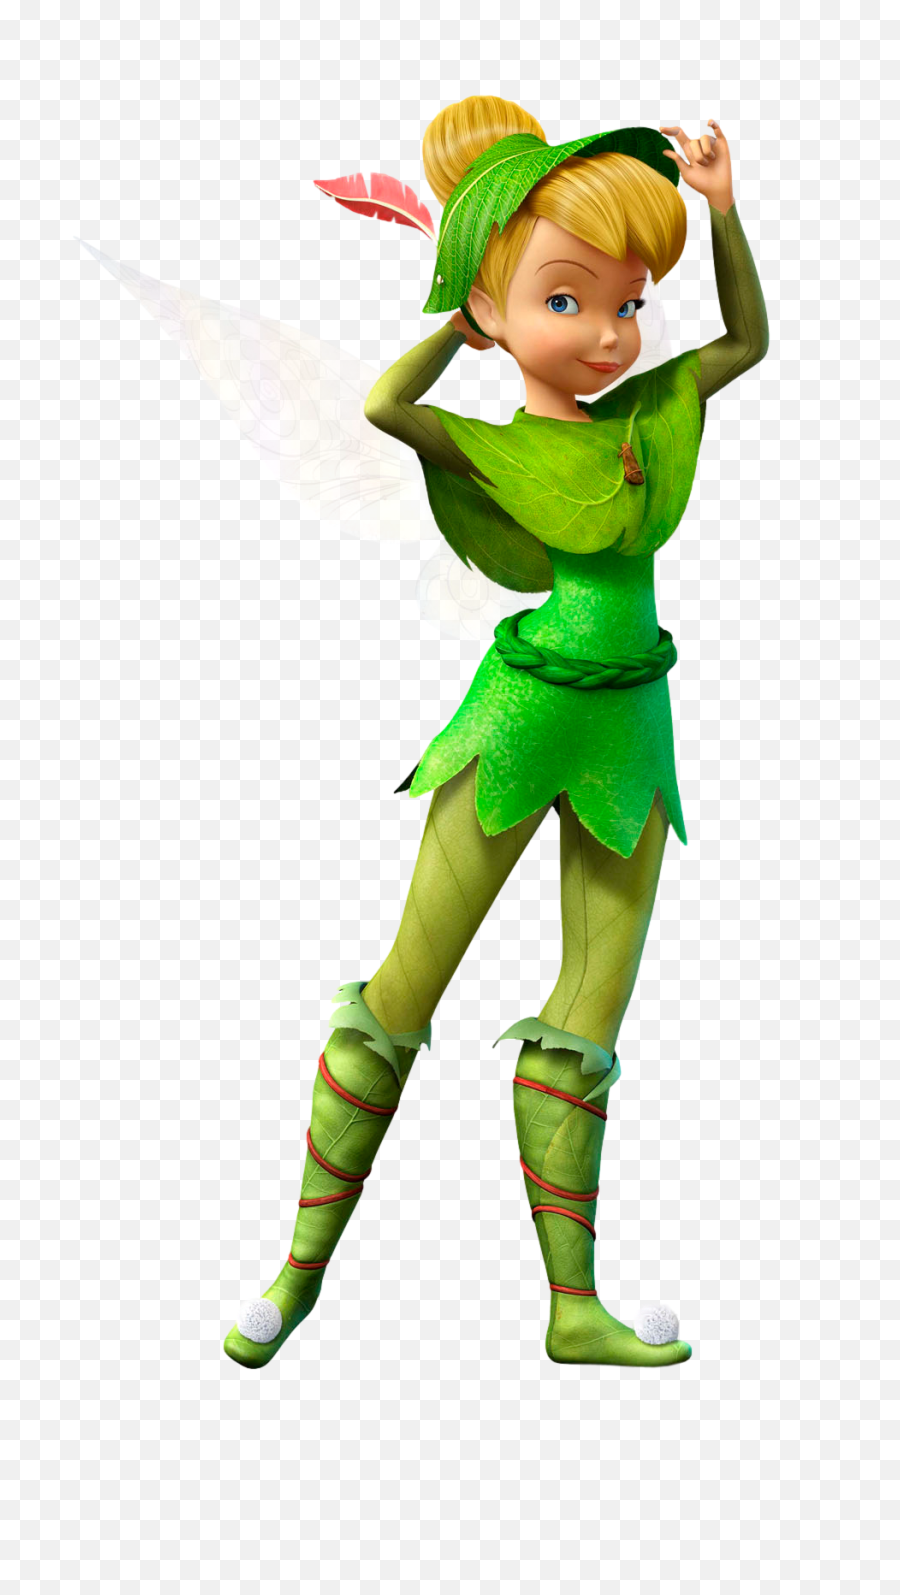 Green Fairy Png Image - Tinker Bell,Fairy Png